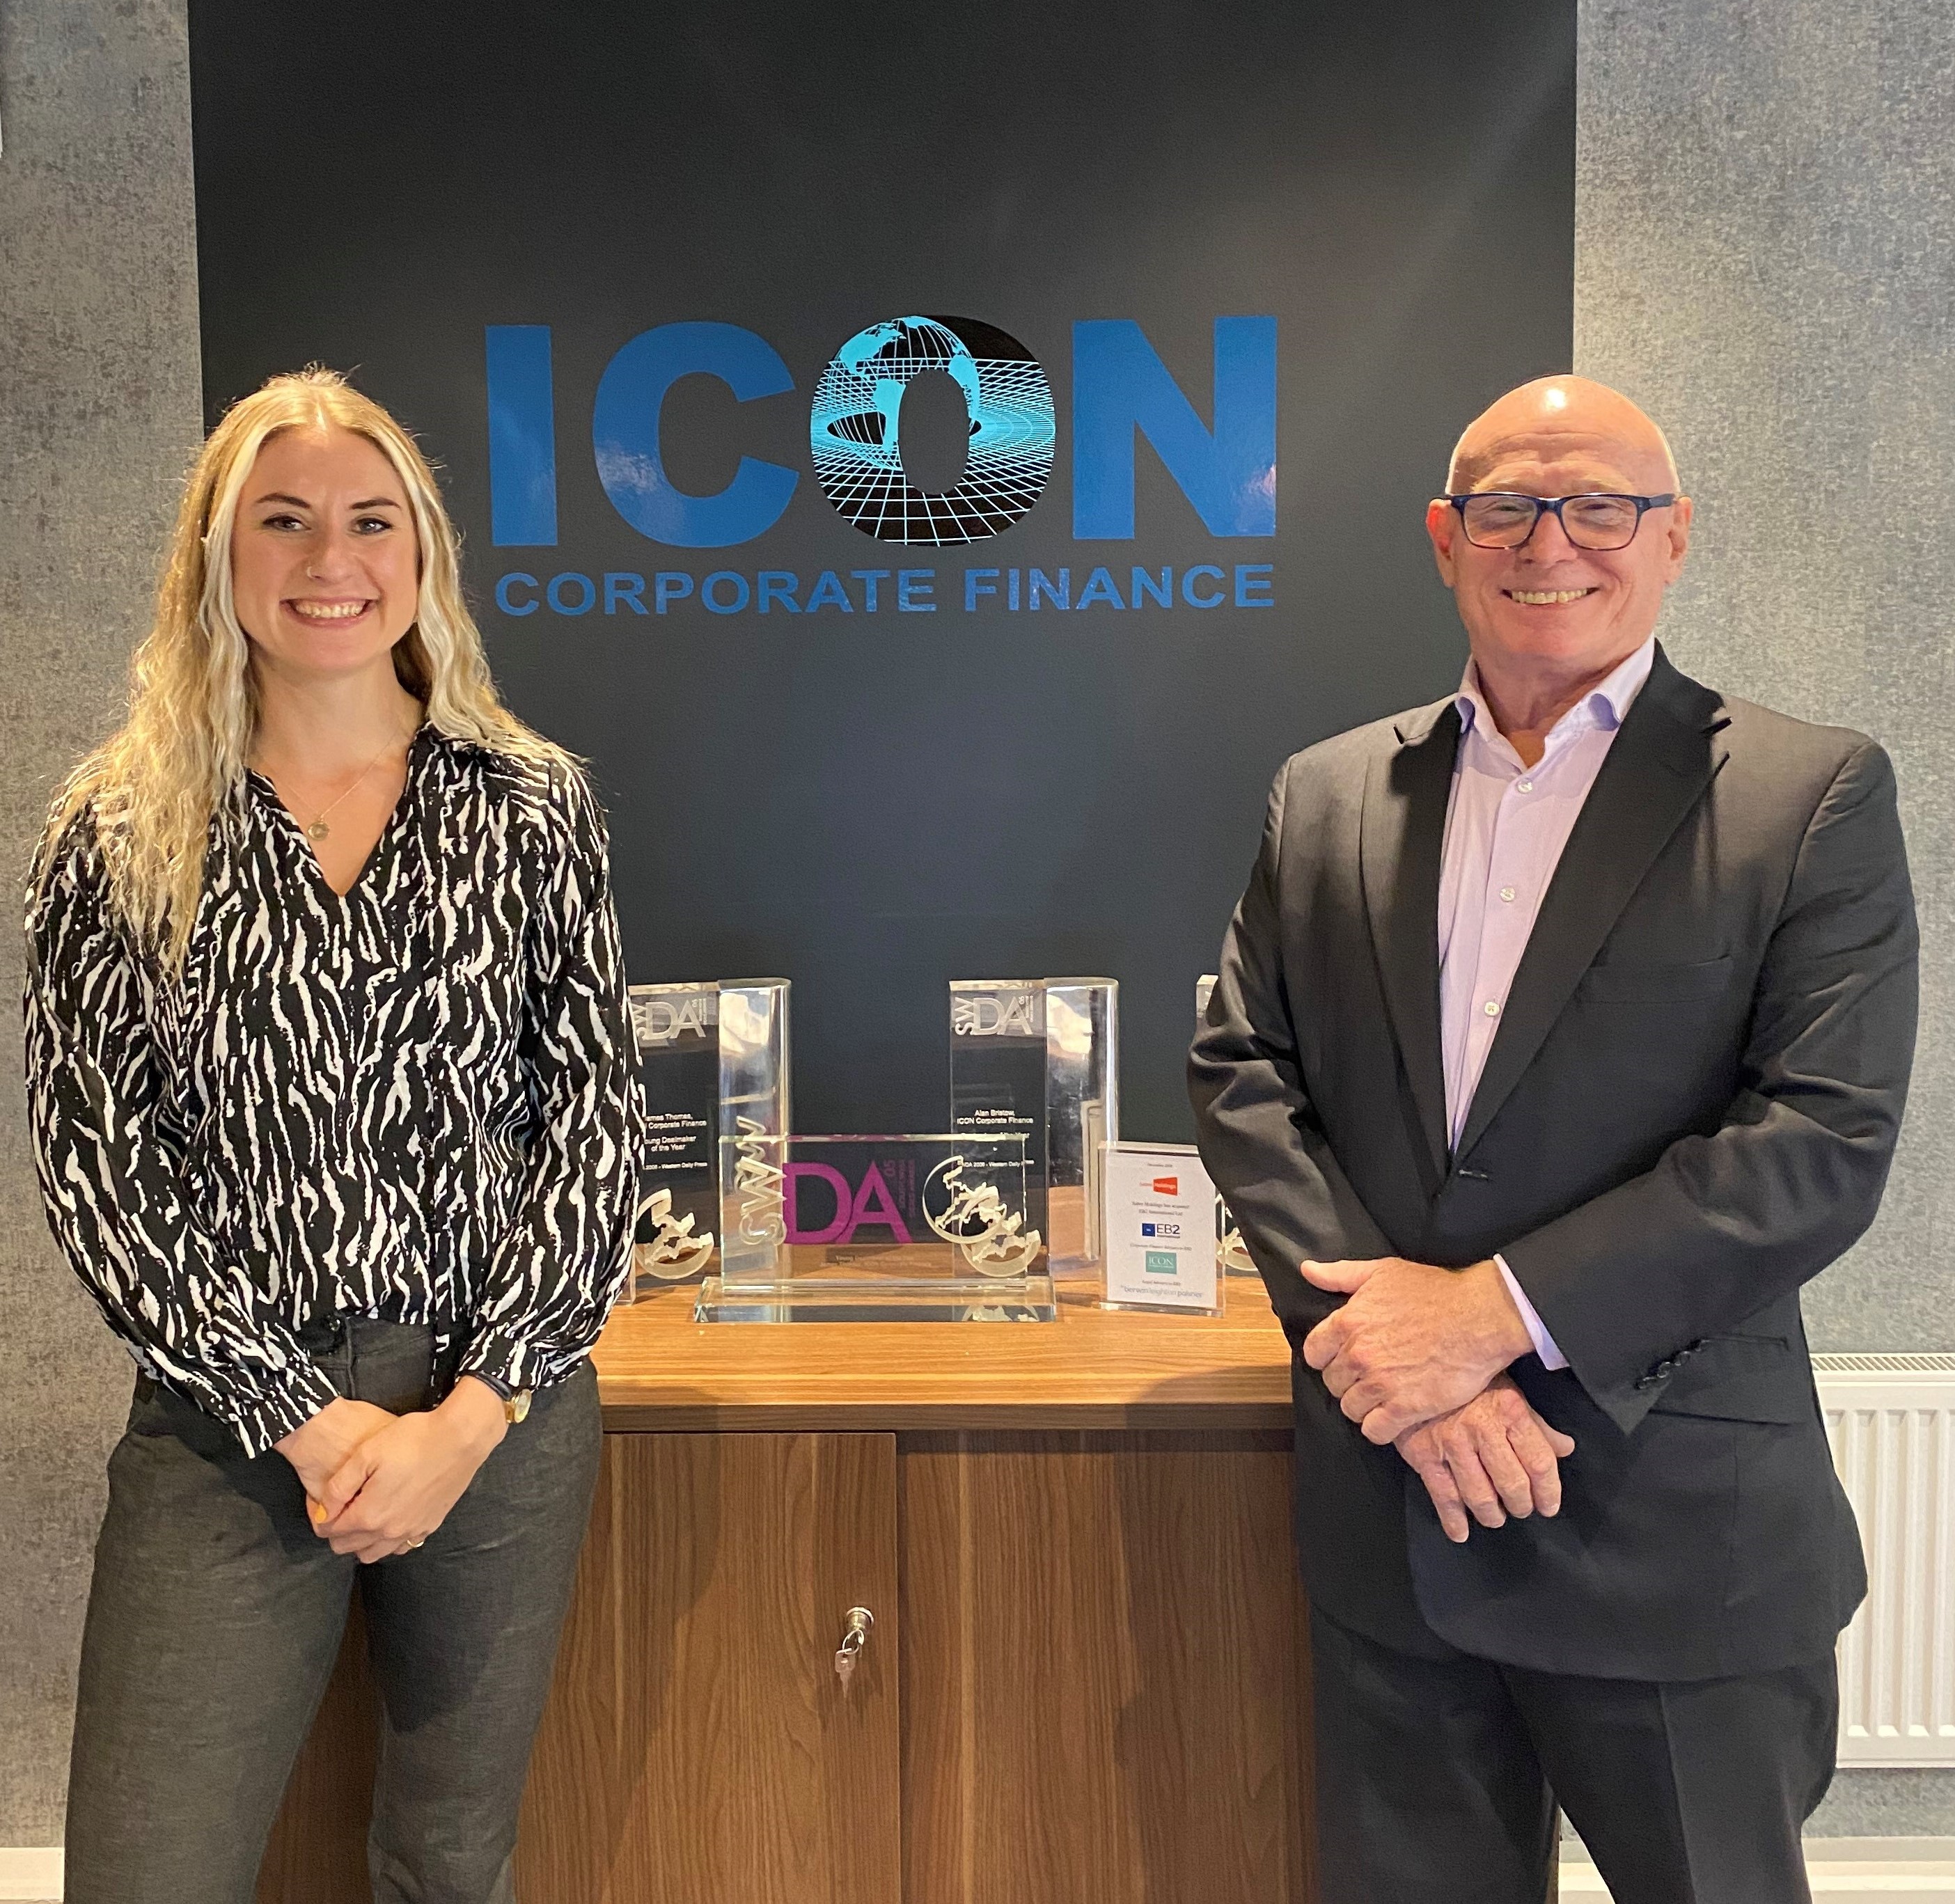 ICON Corporate Finance Appoints Head of Marketing to Support Business Growth